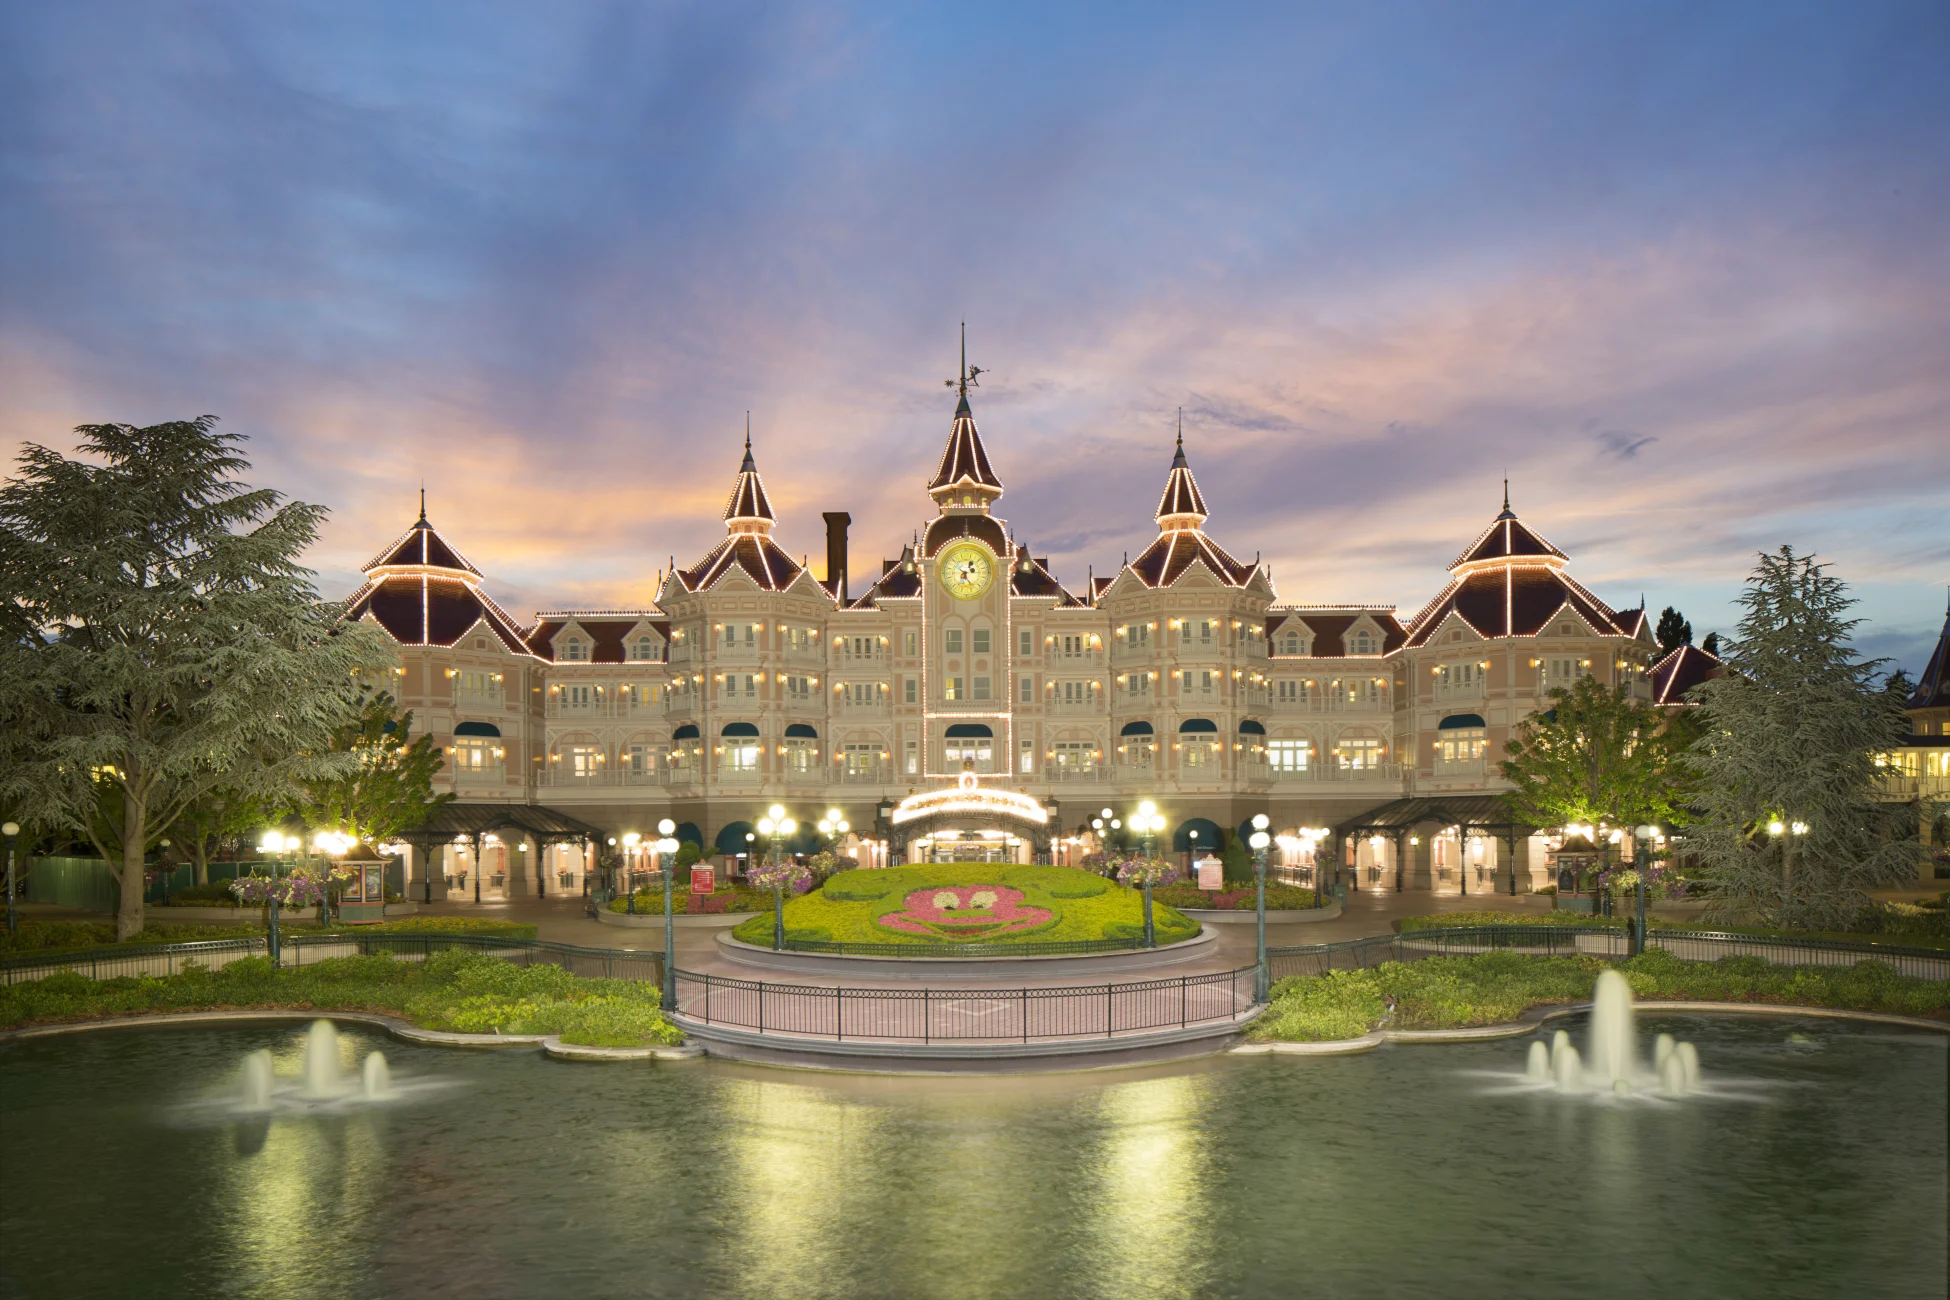 Is there a Hotel inside Disneyland Paris?